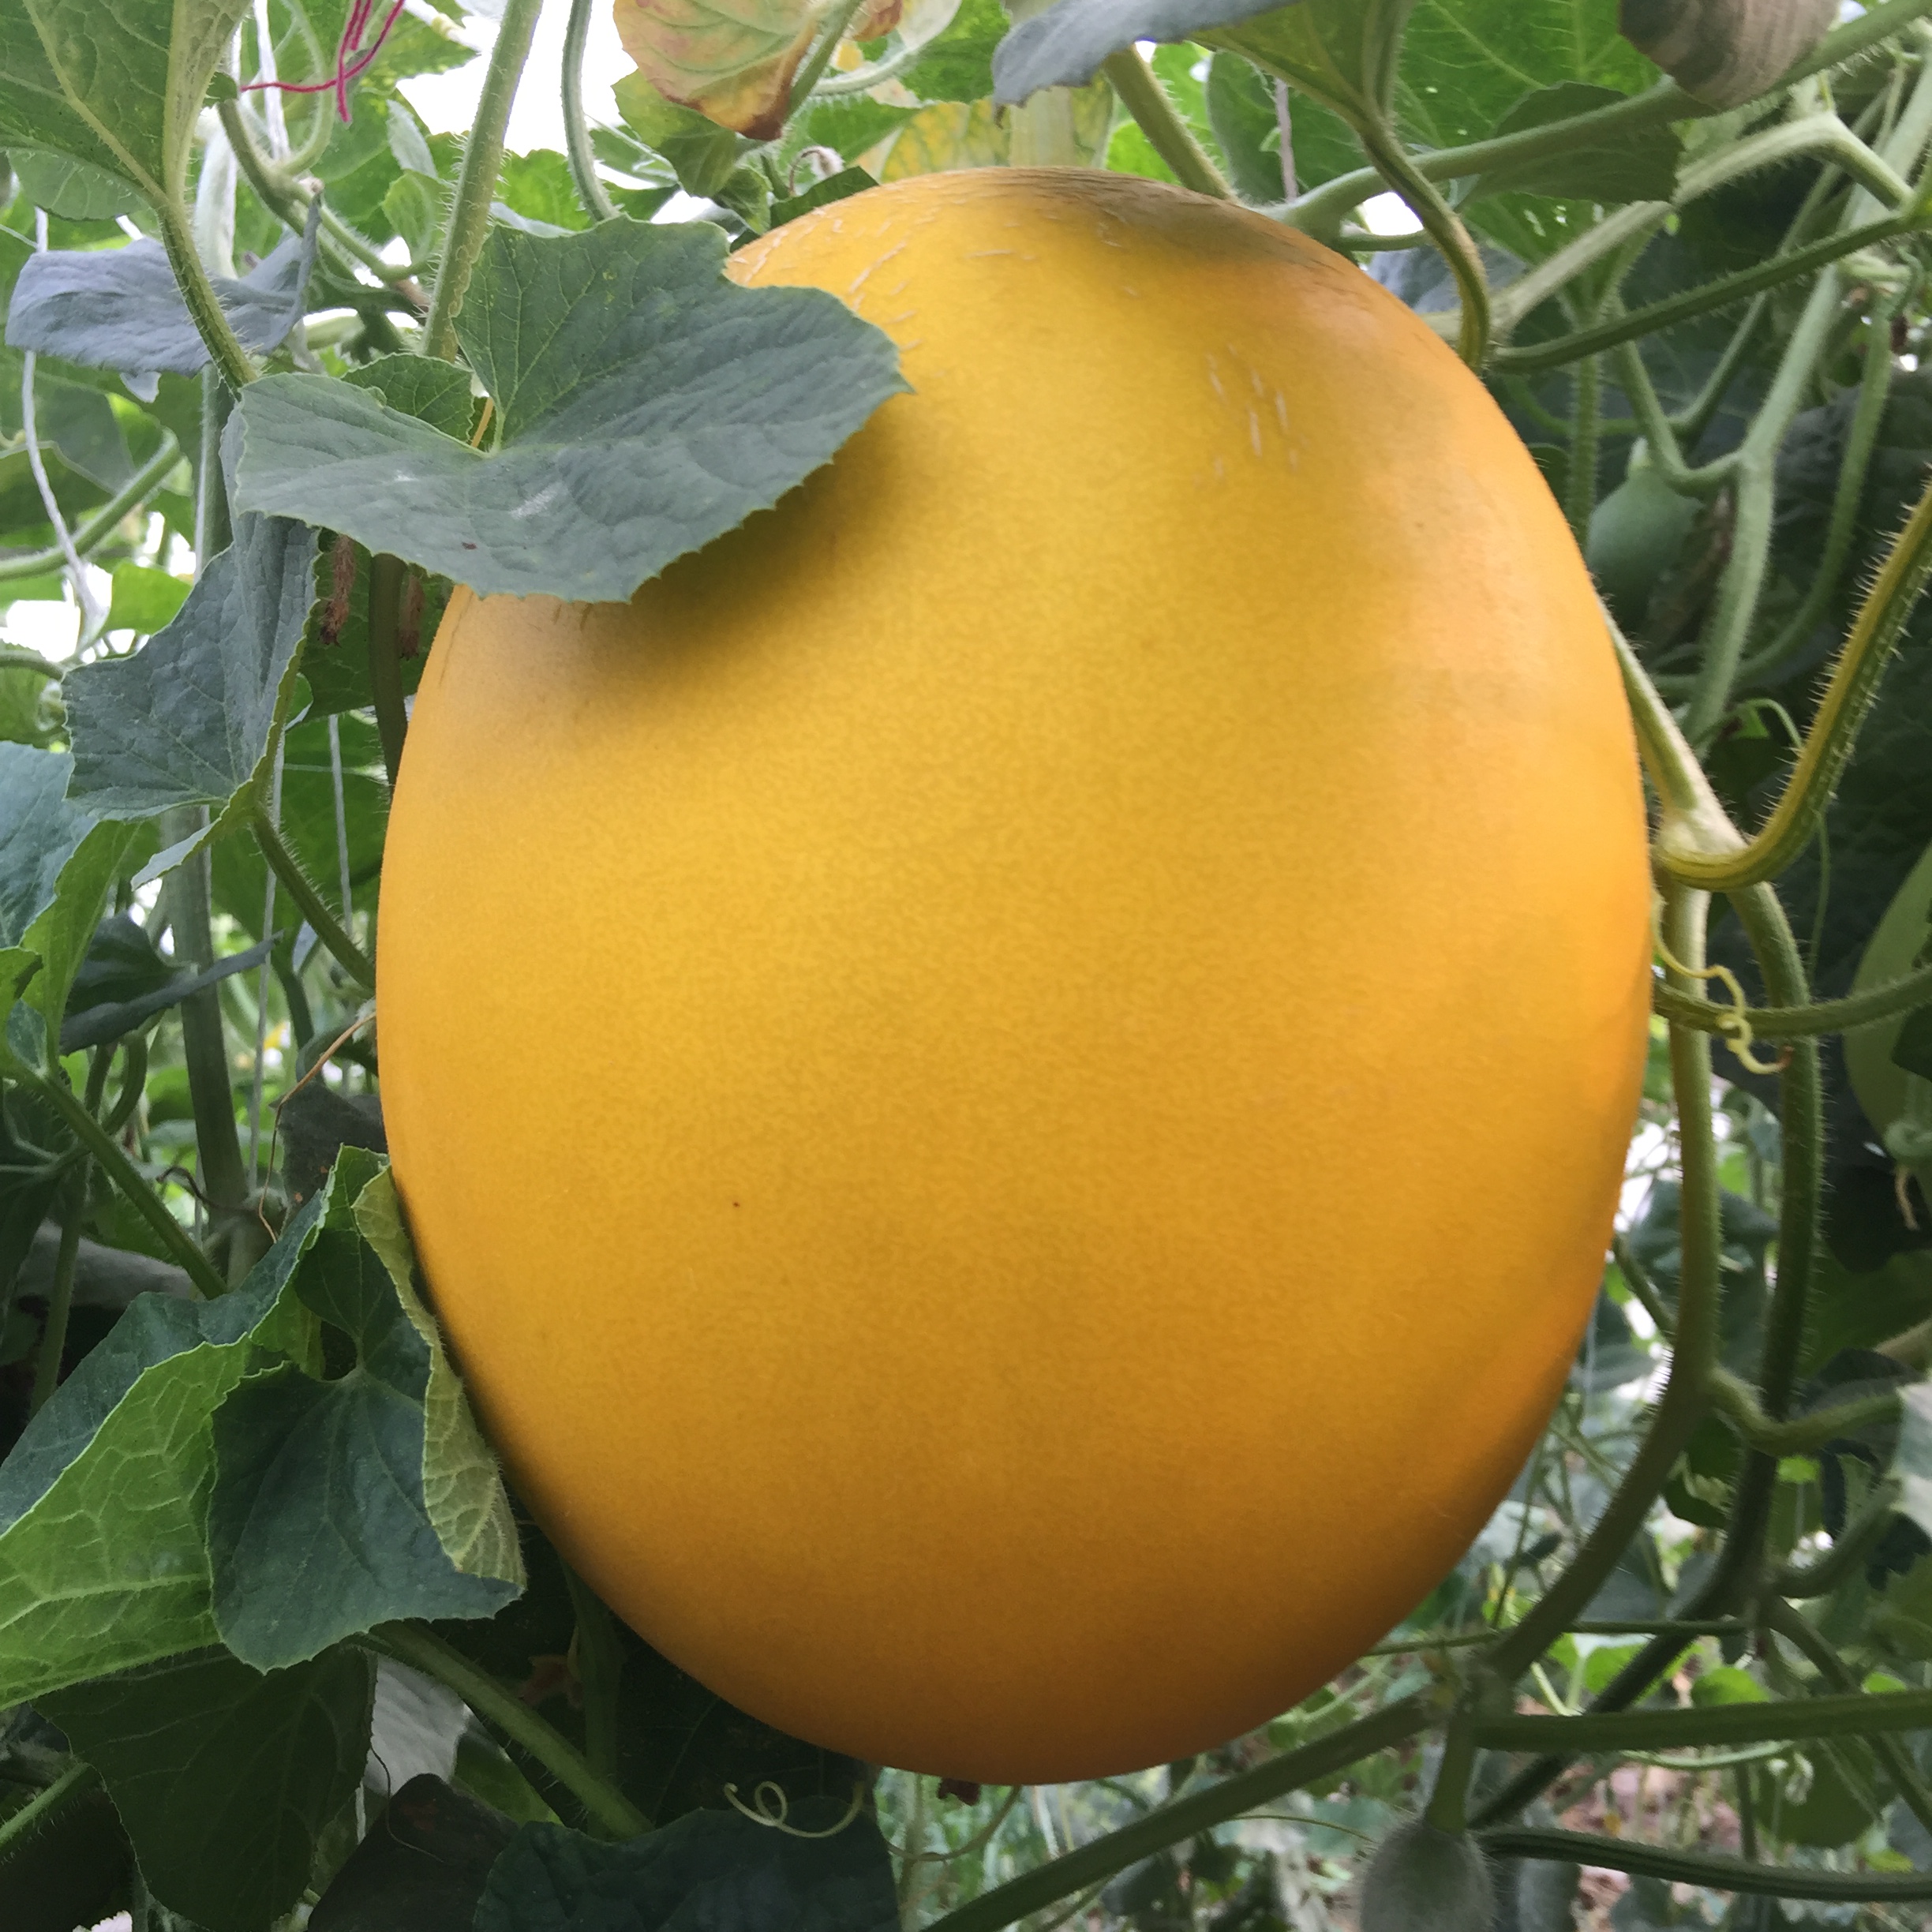 Wholesale China Yellow Skin Watermelon Seeds Manufacturers Suppliers –  High yield yellow skin crispy flesh hybrid melon seeds for planting  – Shuangxing